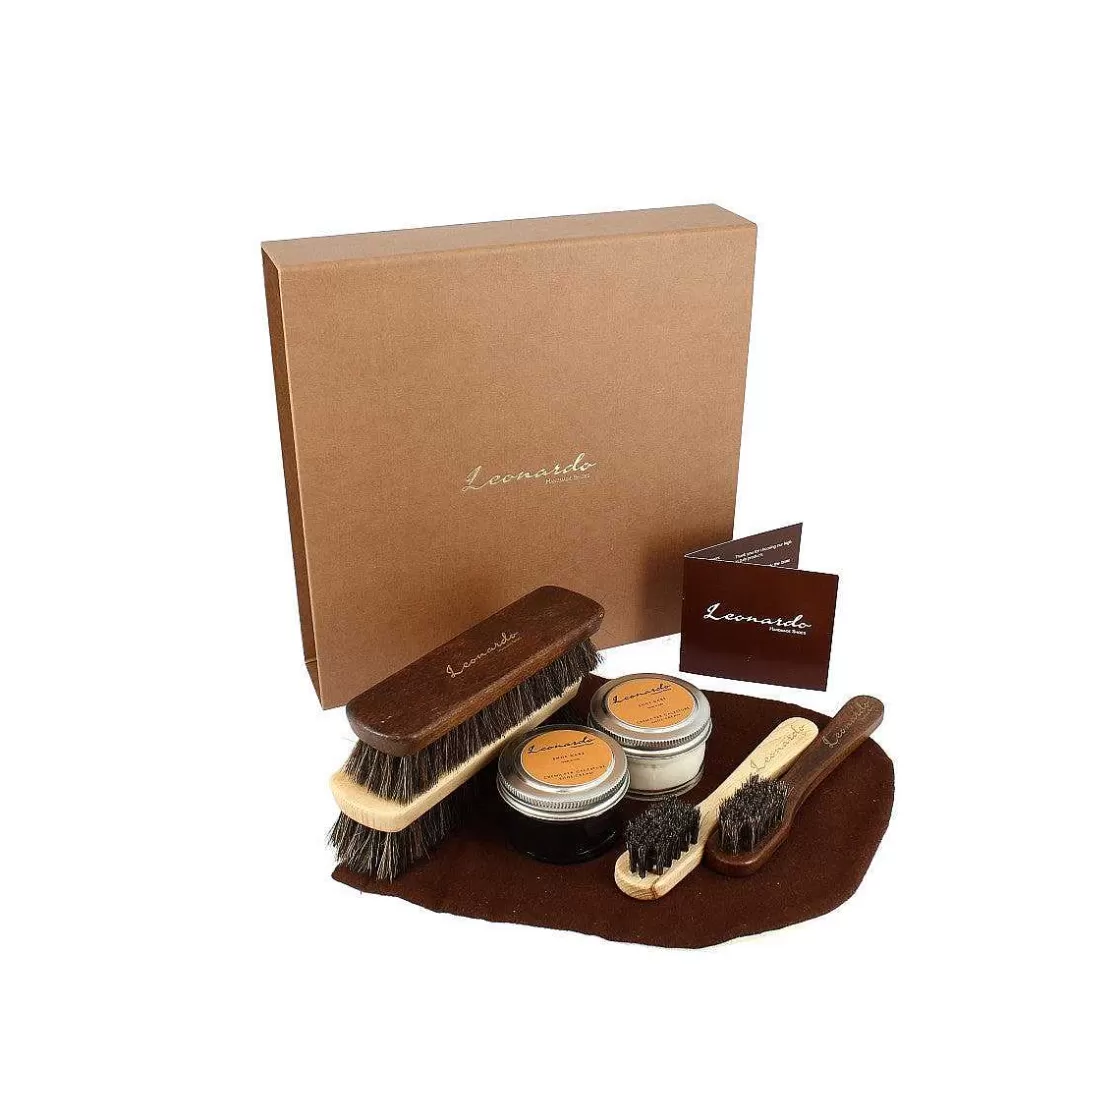 Leonardo Smooth Leather Shoe Cleaning And Care Kit With Brushes And Polishes Discount